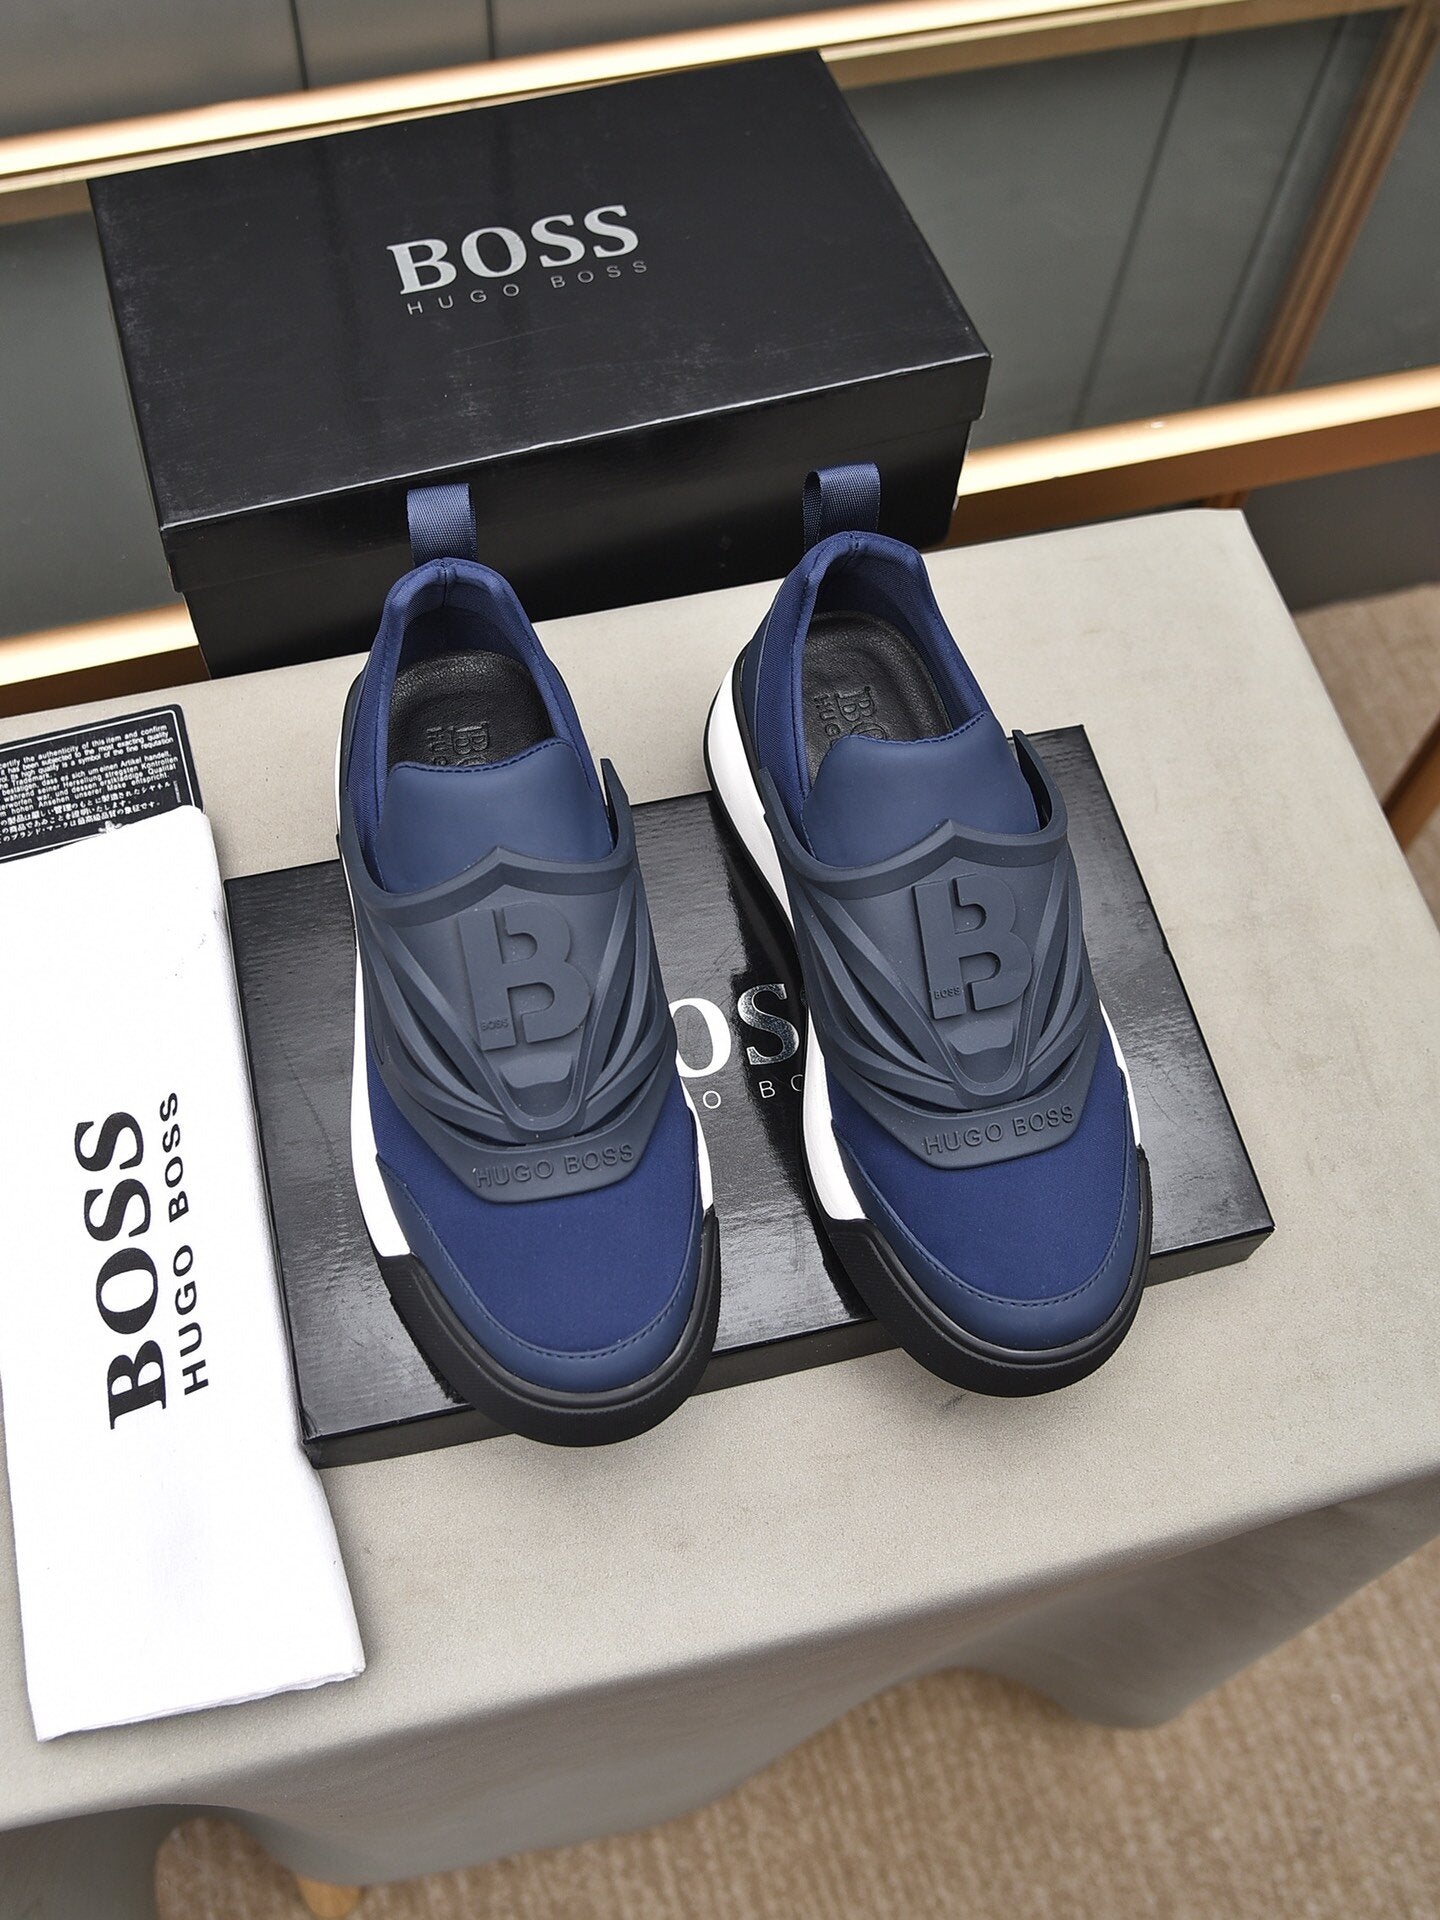 BOSS spaceship shoes